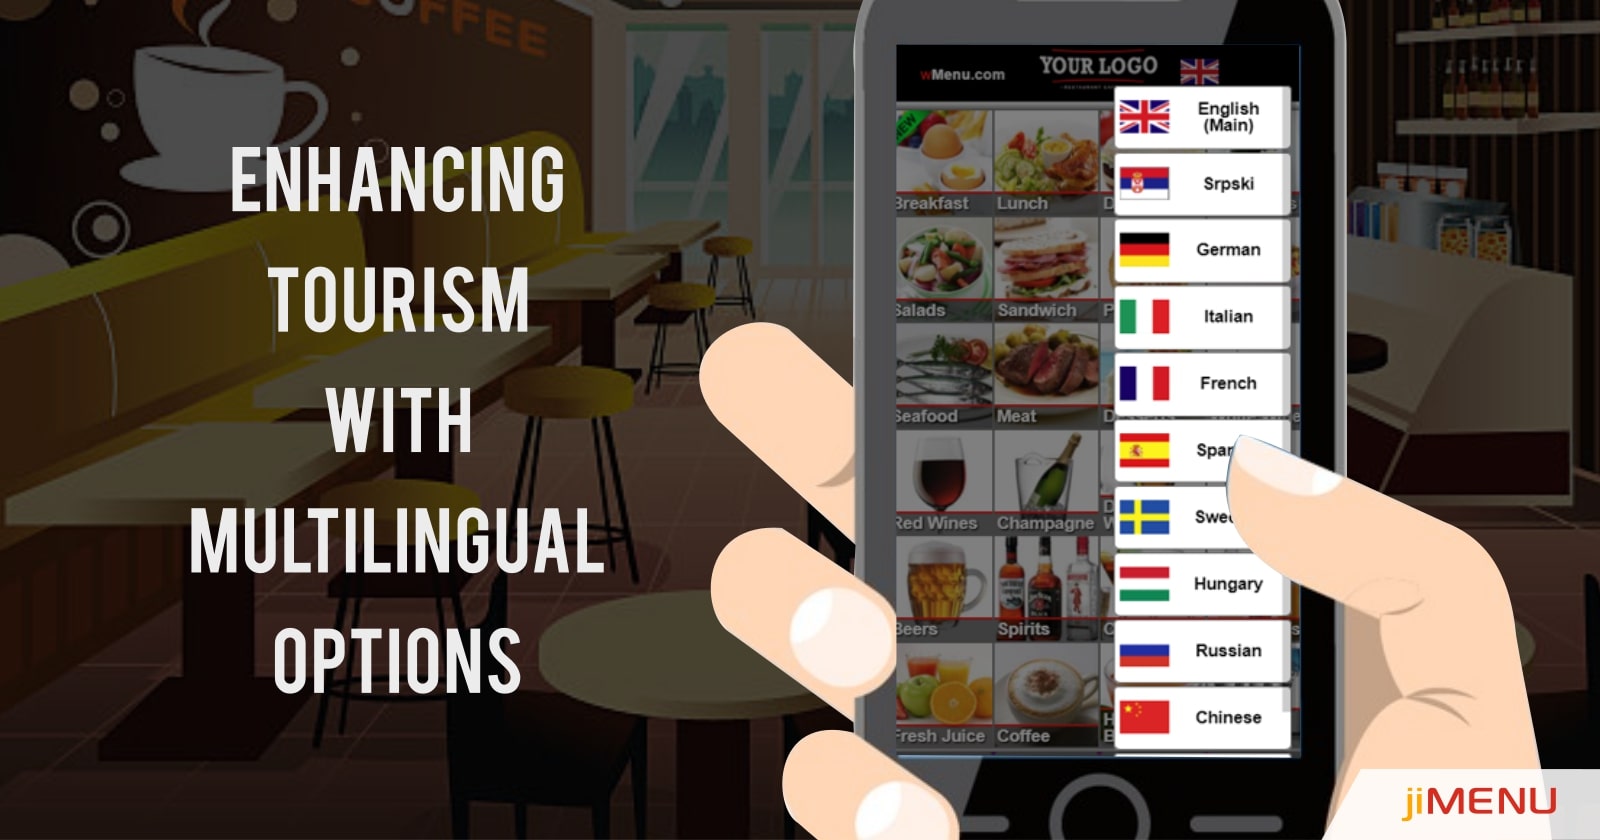 How Digital Menu Overcomes the Multi-Language Issues In Tourism